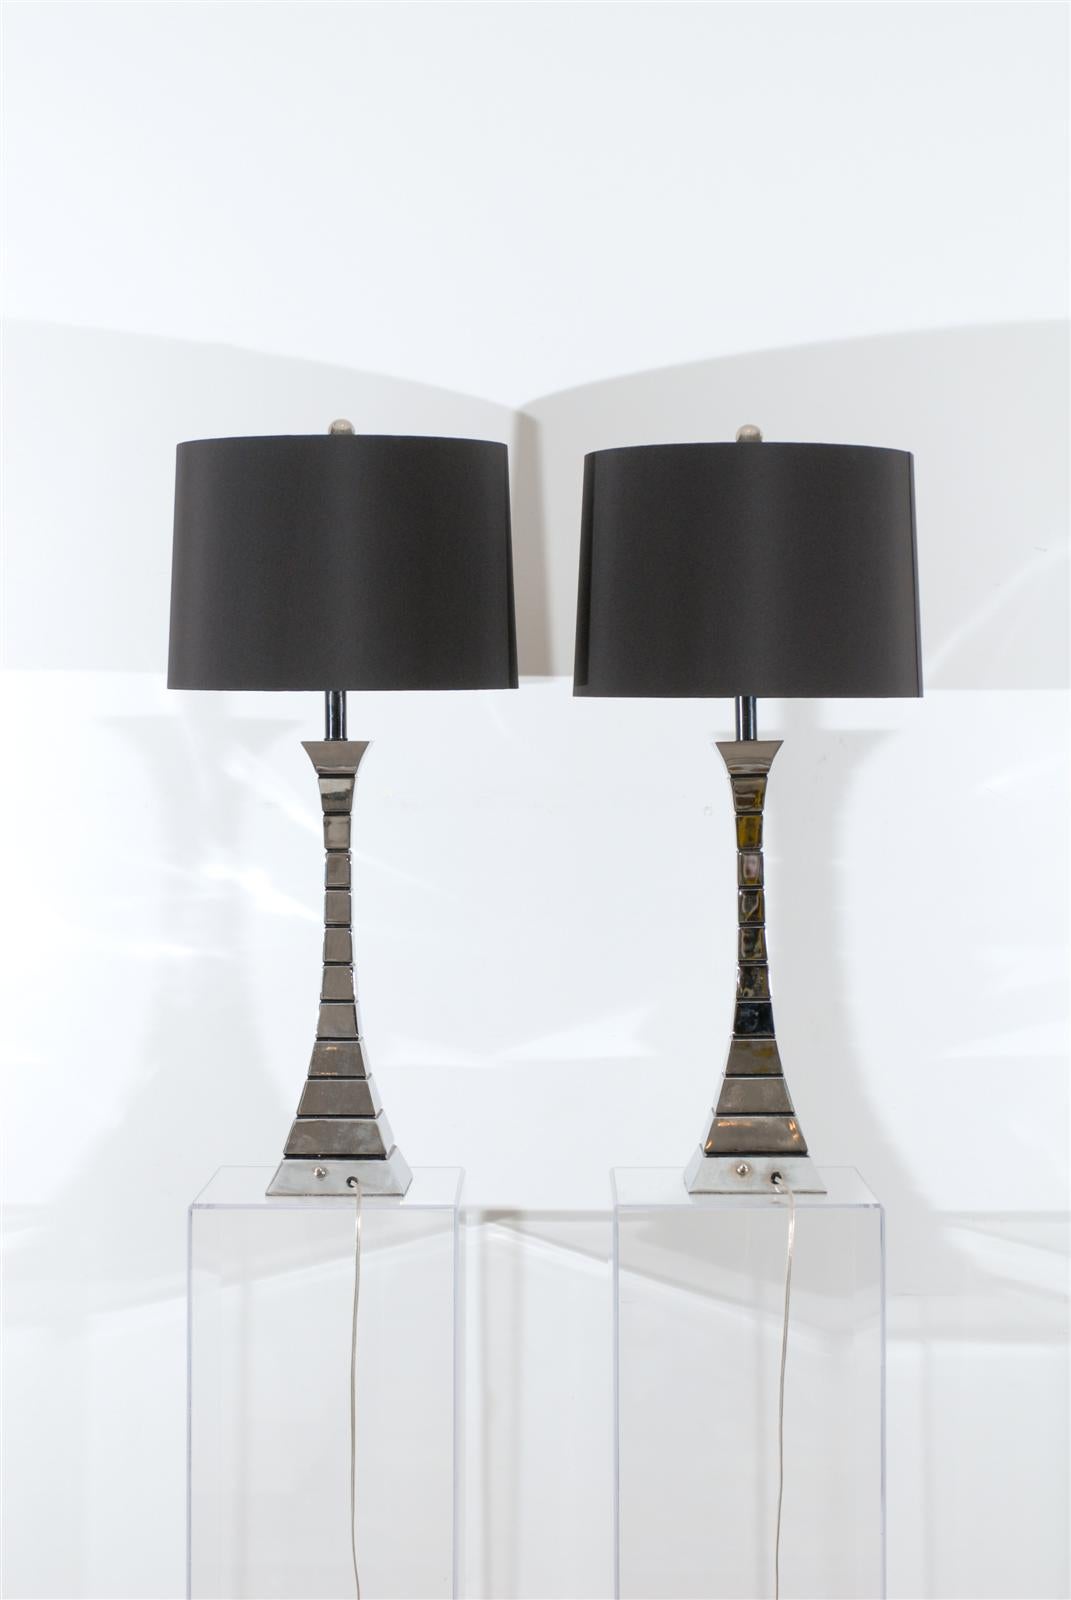 Pair of Midcentury Lamps in Chrome In Excellent Condition For Sale In Atlanta, GA